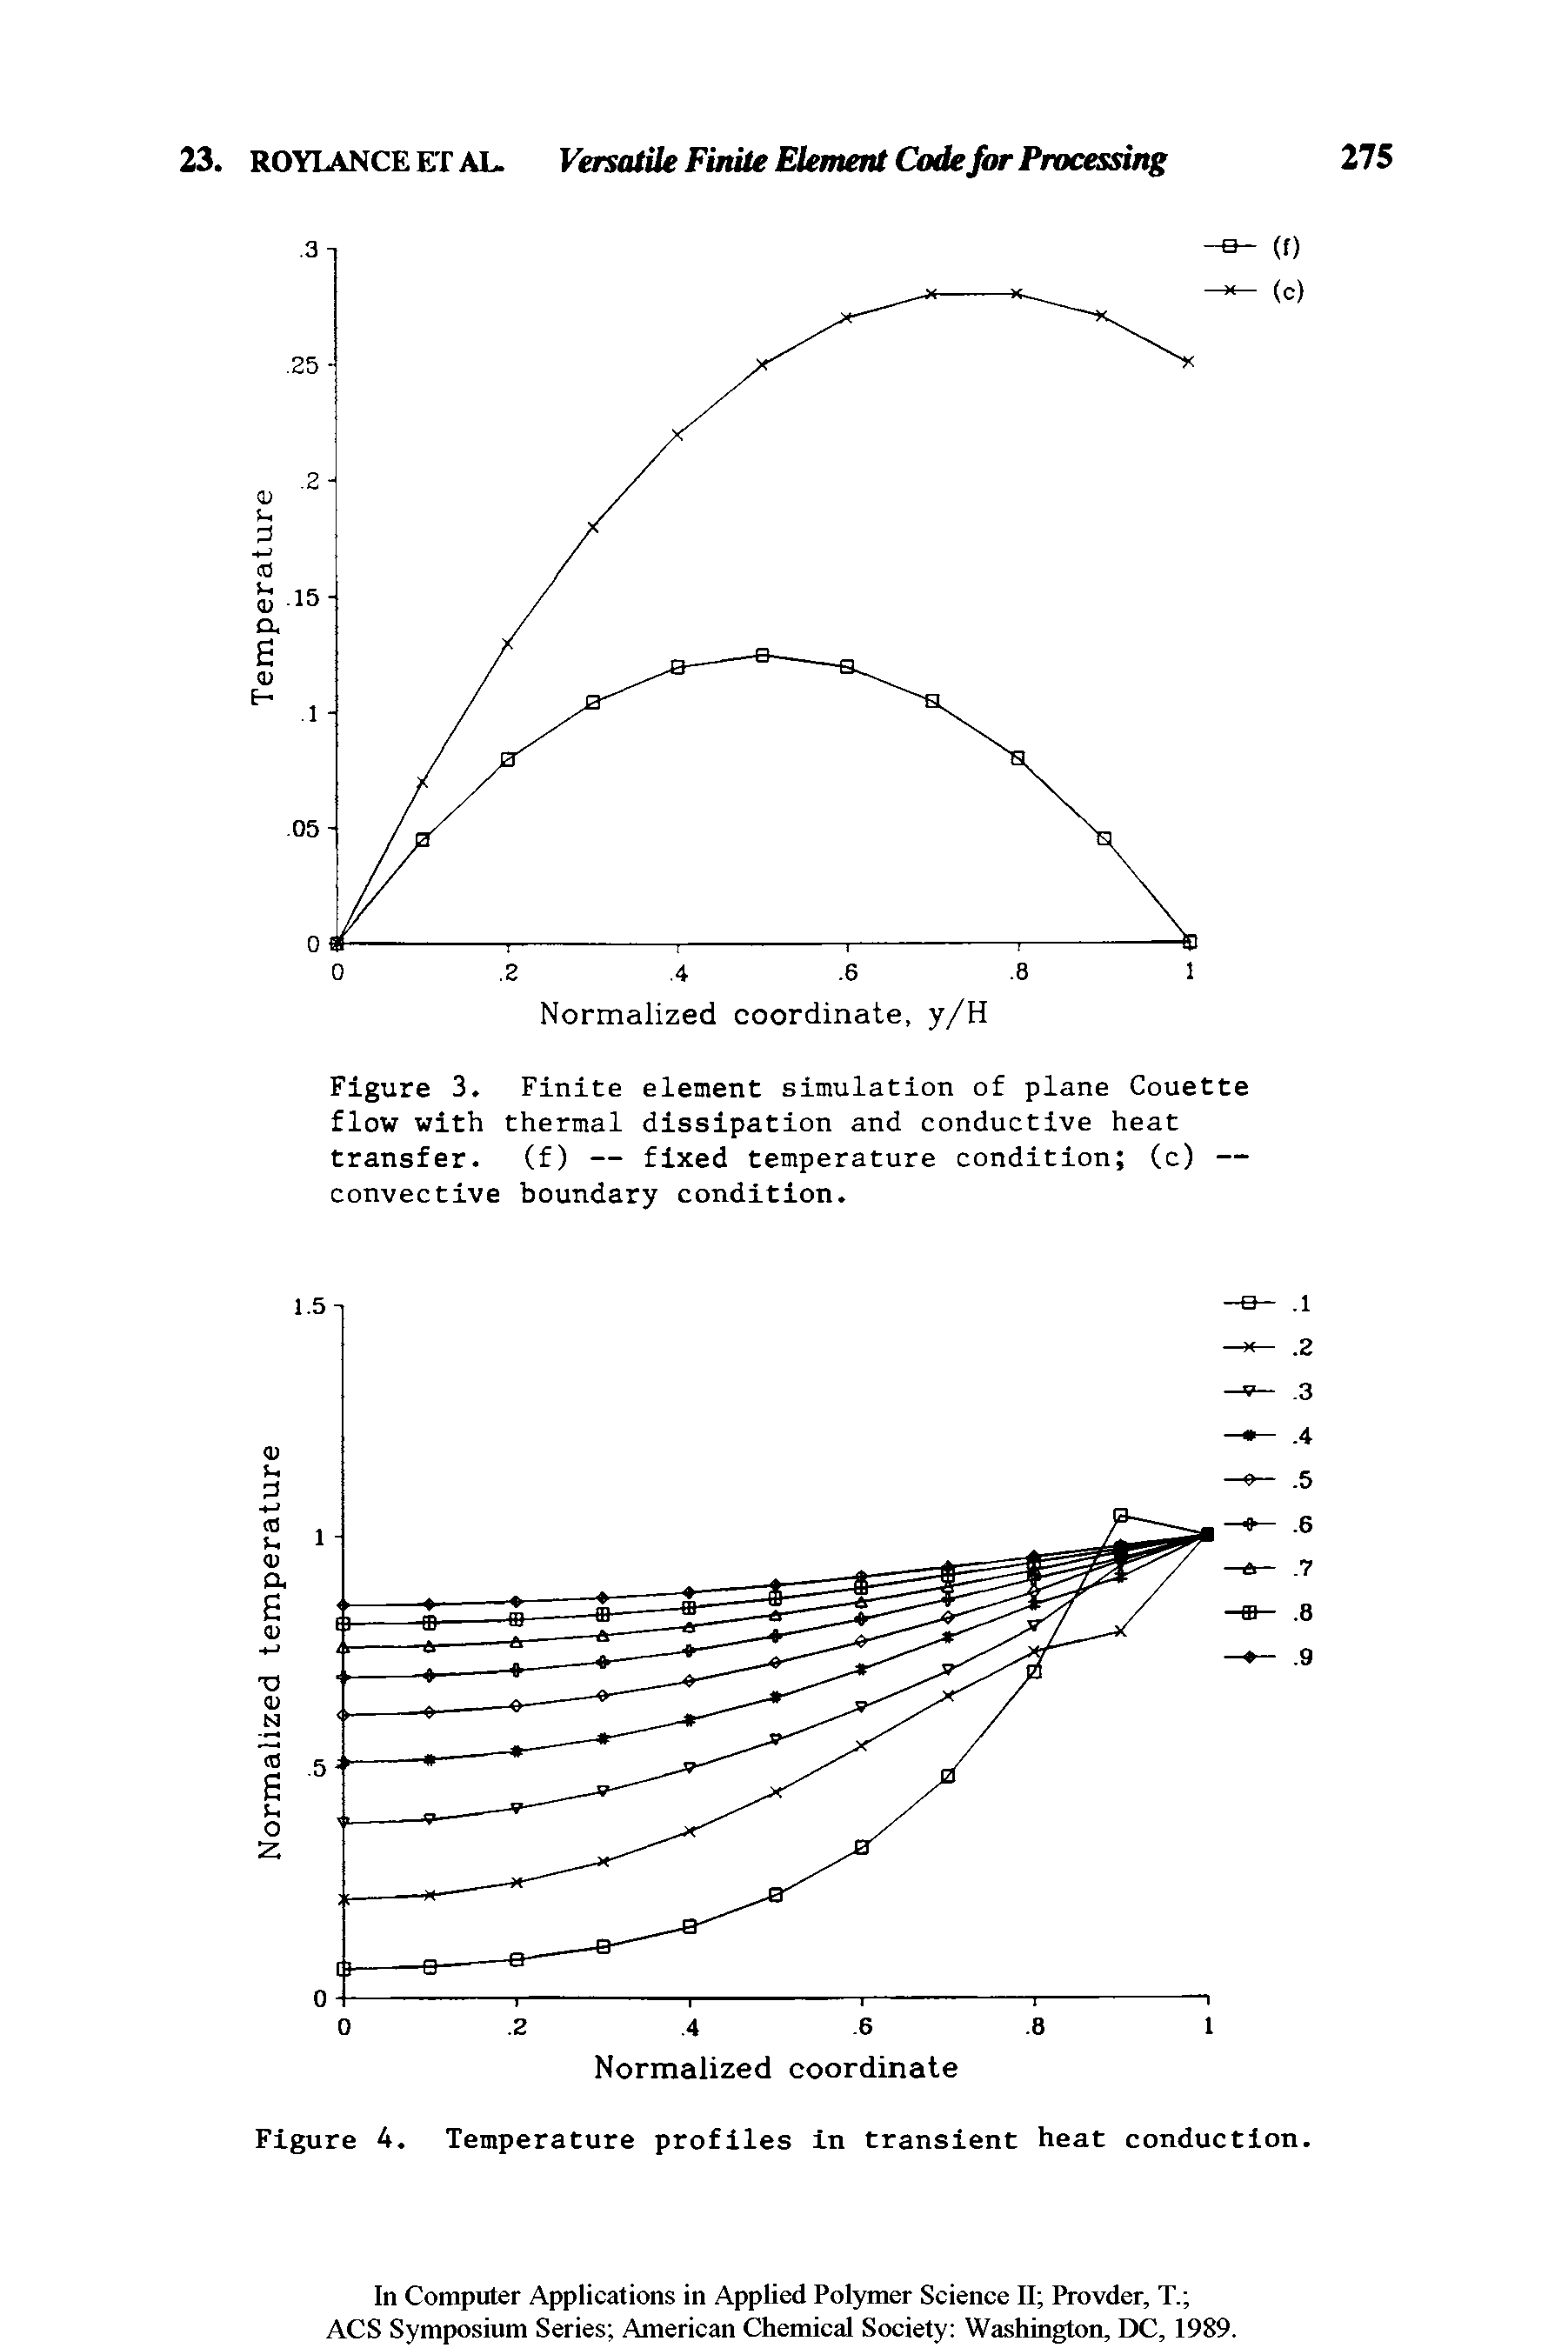 Figure 3. Finite element simulation of plane Couette flow with thermal dissipation and conductive heat transfer. (f) — fixed temperature condition (c) — convective boundary condition.